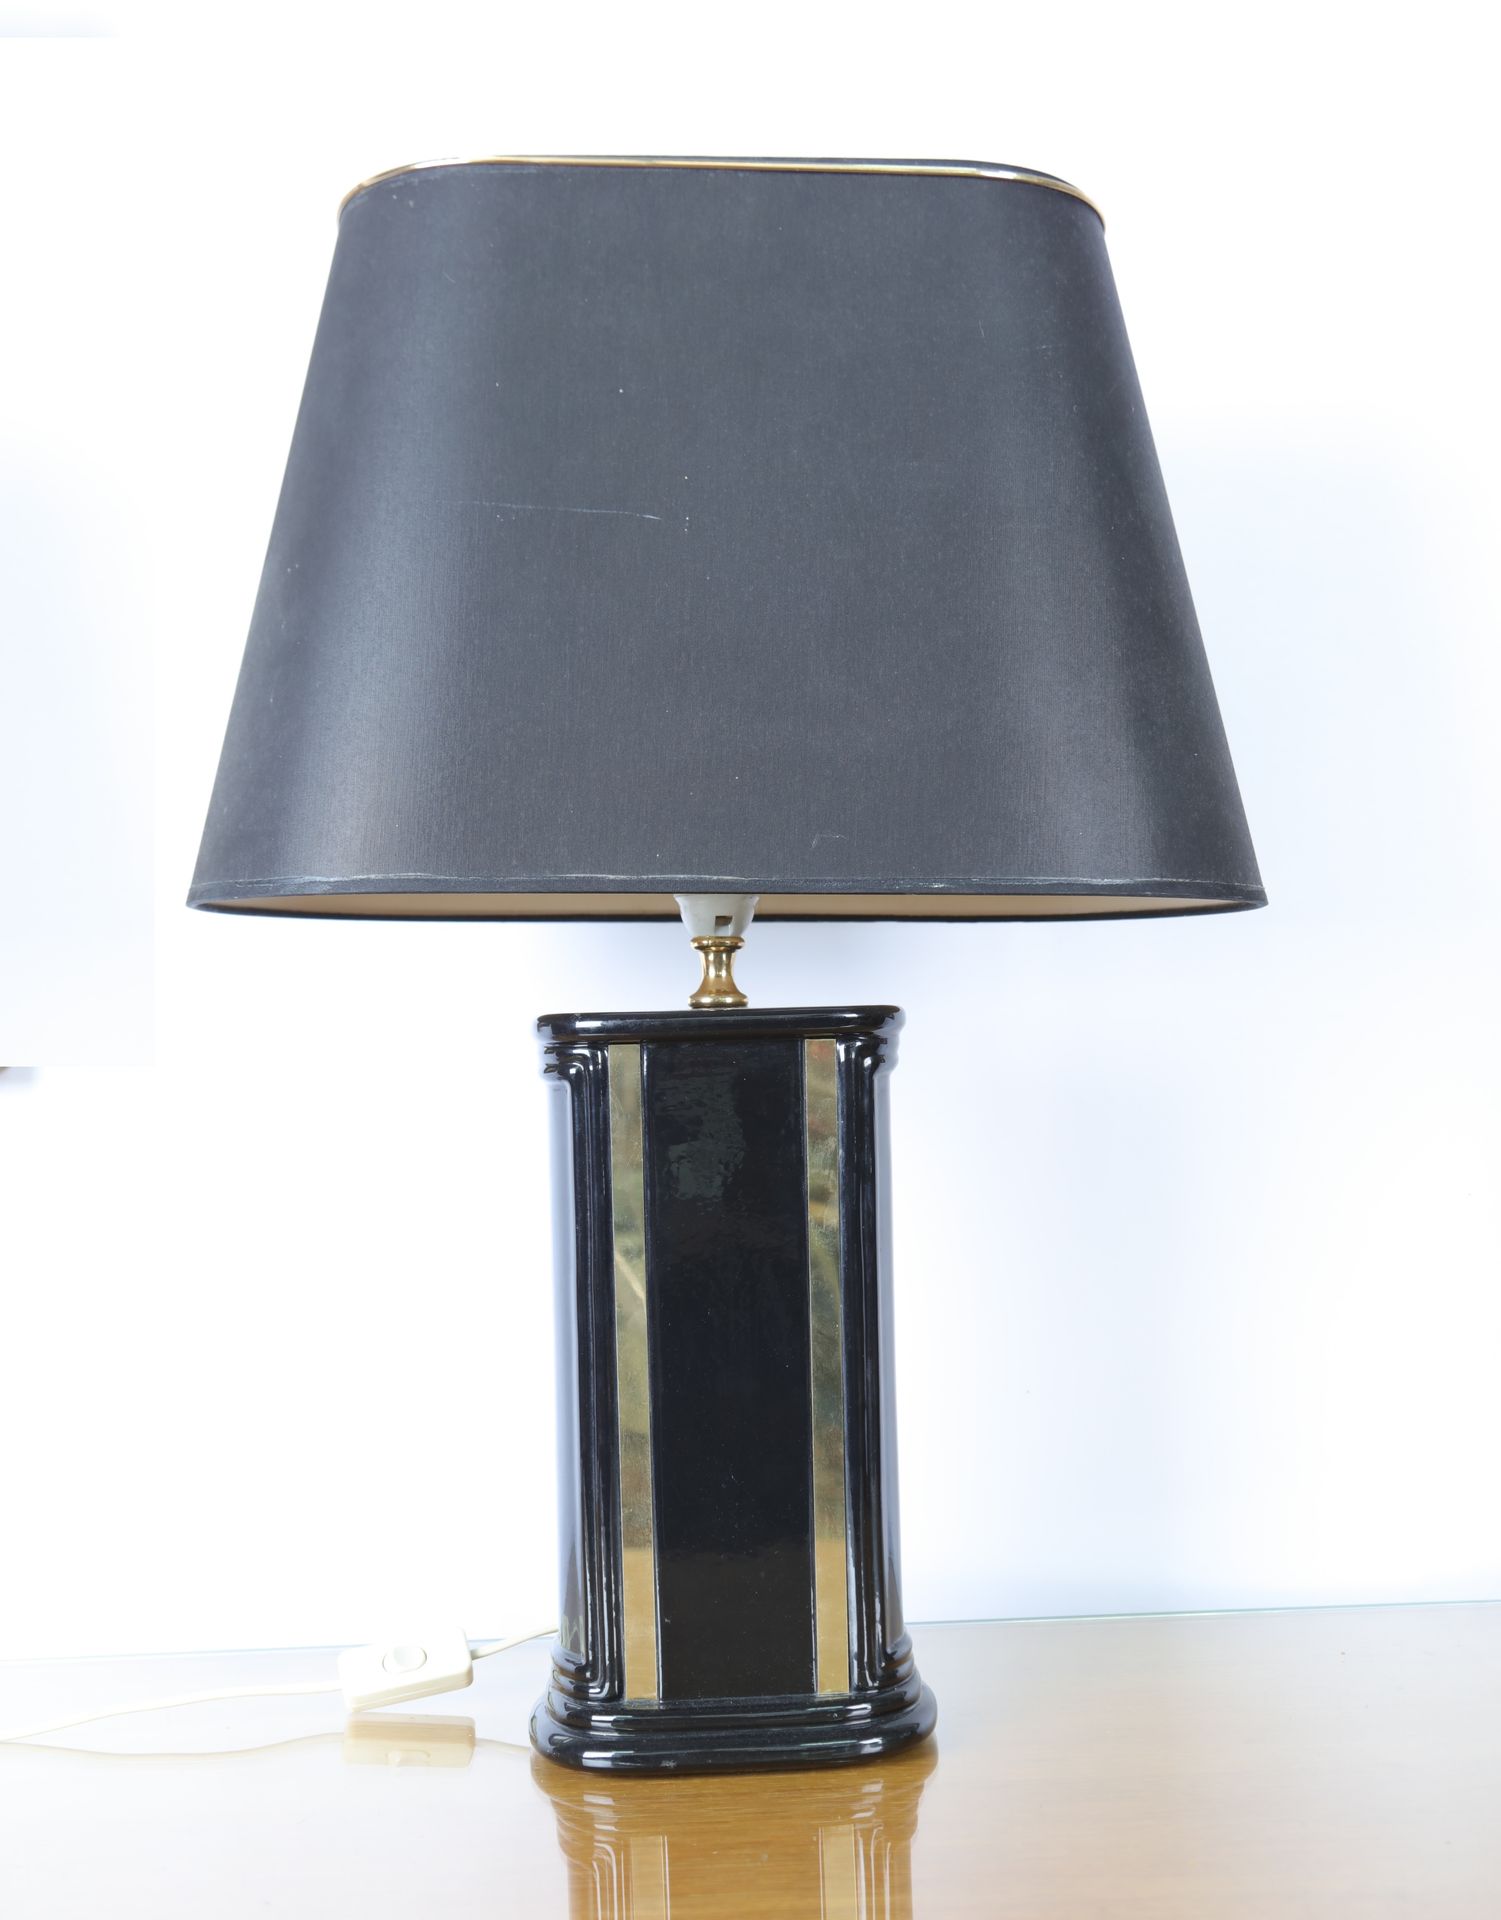 Null Black lacquered lamp with brass lines, black oblong shade.